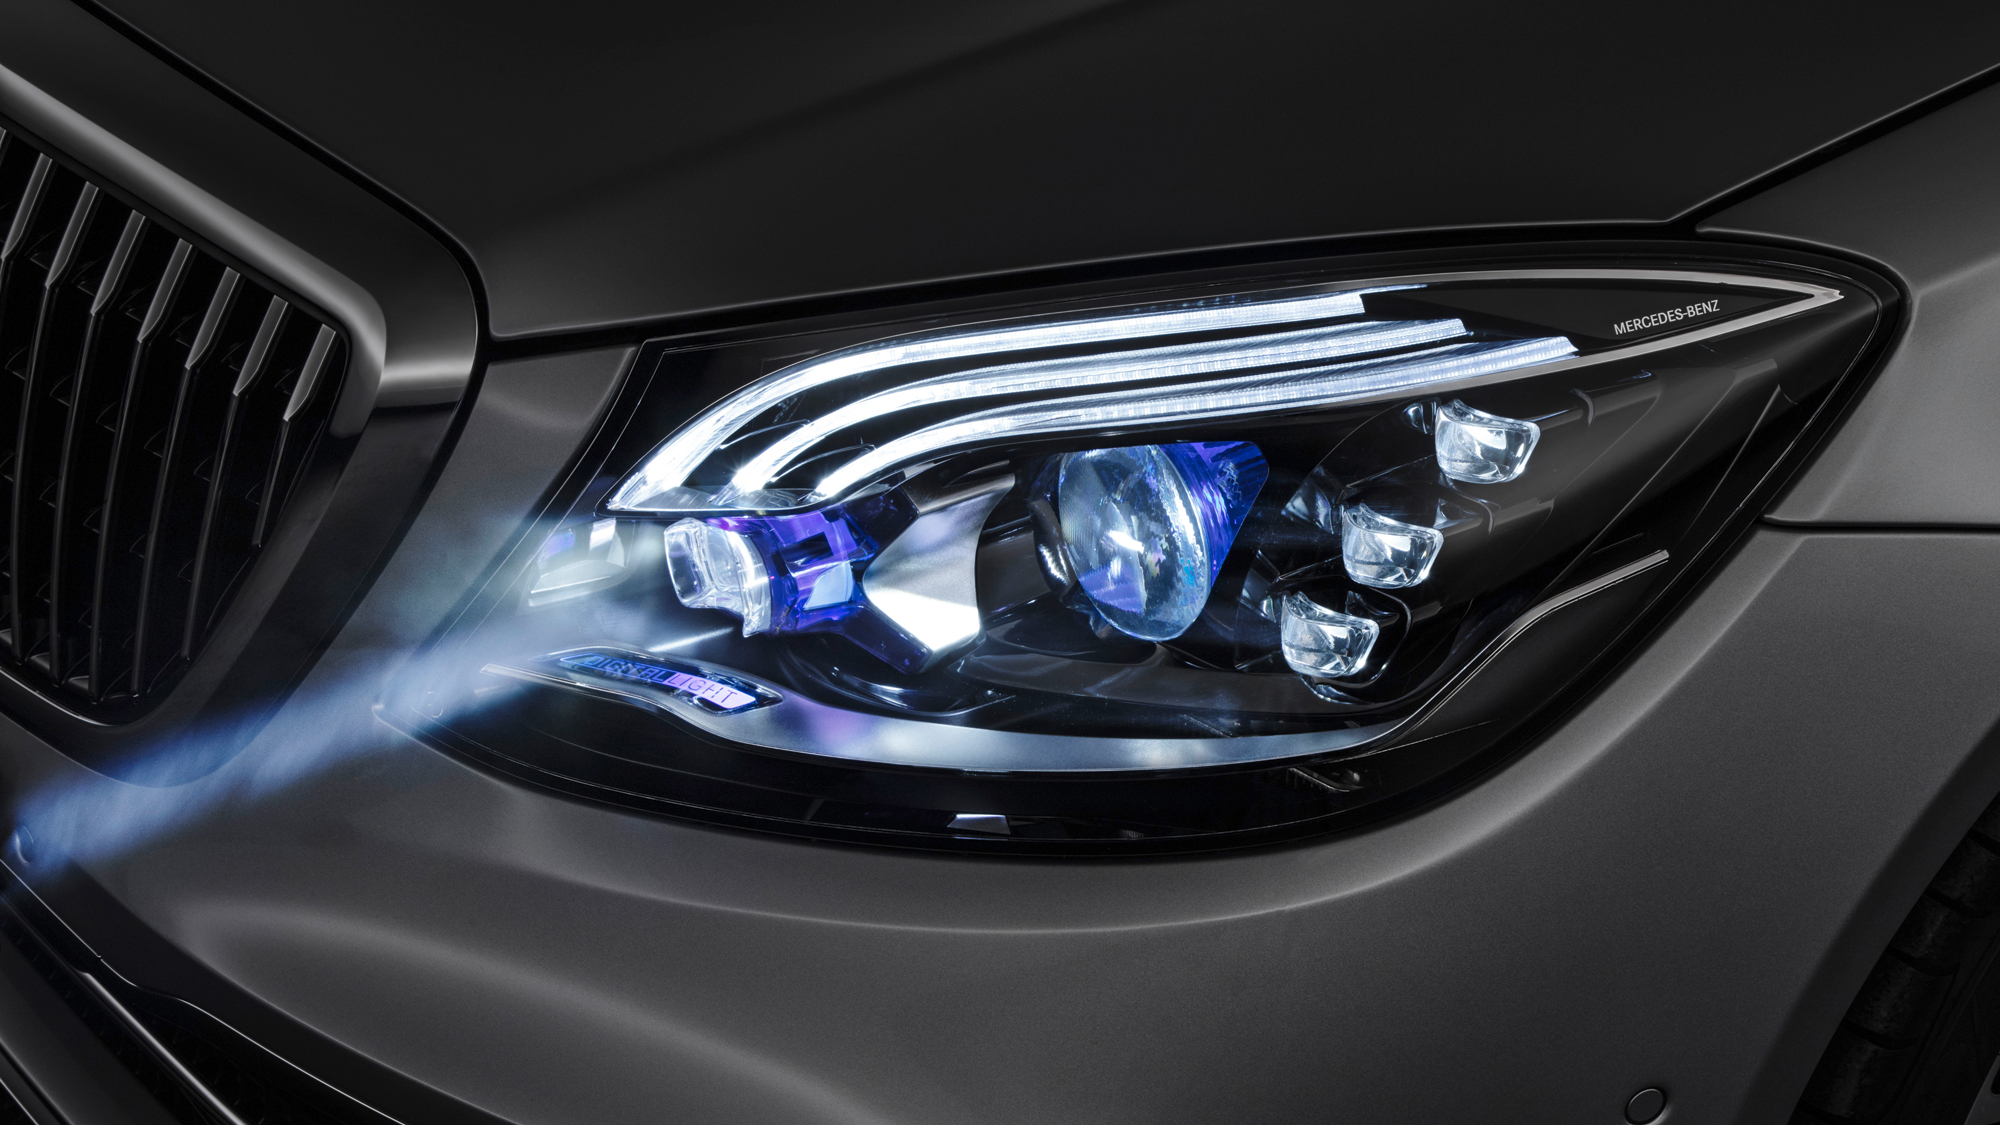 Mercedes’ Futuristic Headlights Shine Warning Symbols On The Road, And They’re No Longer Just A Concept